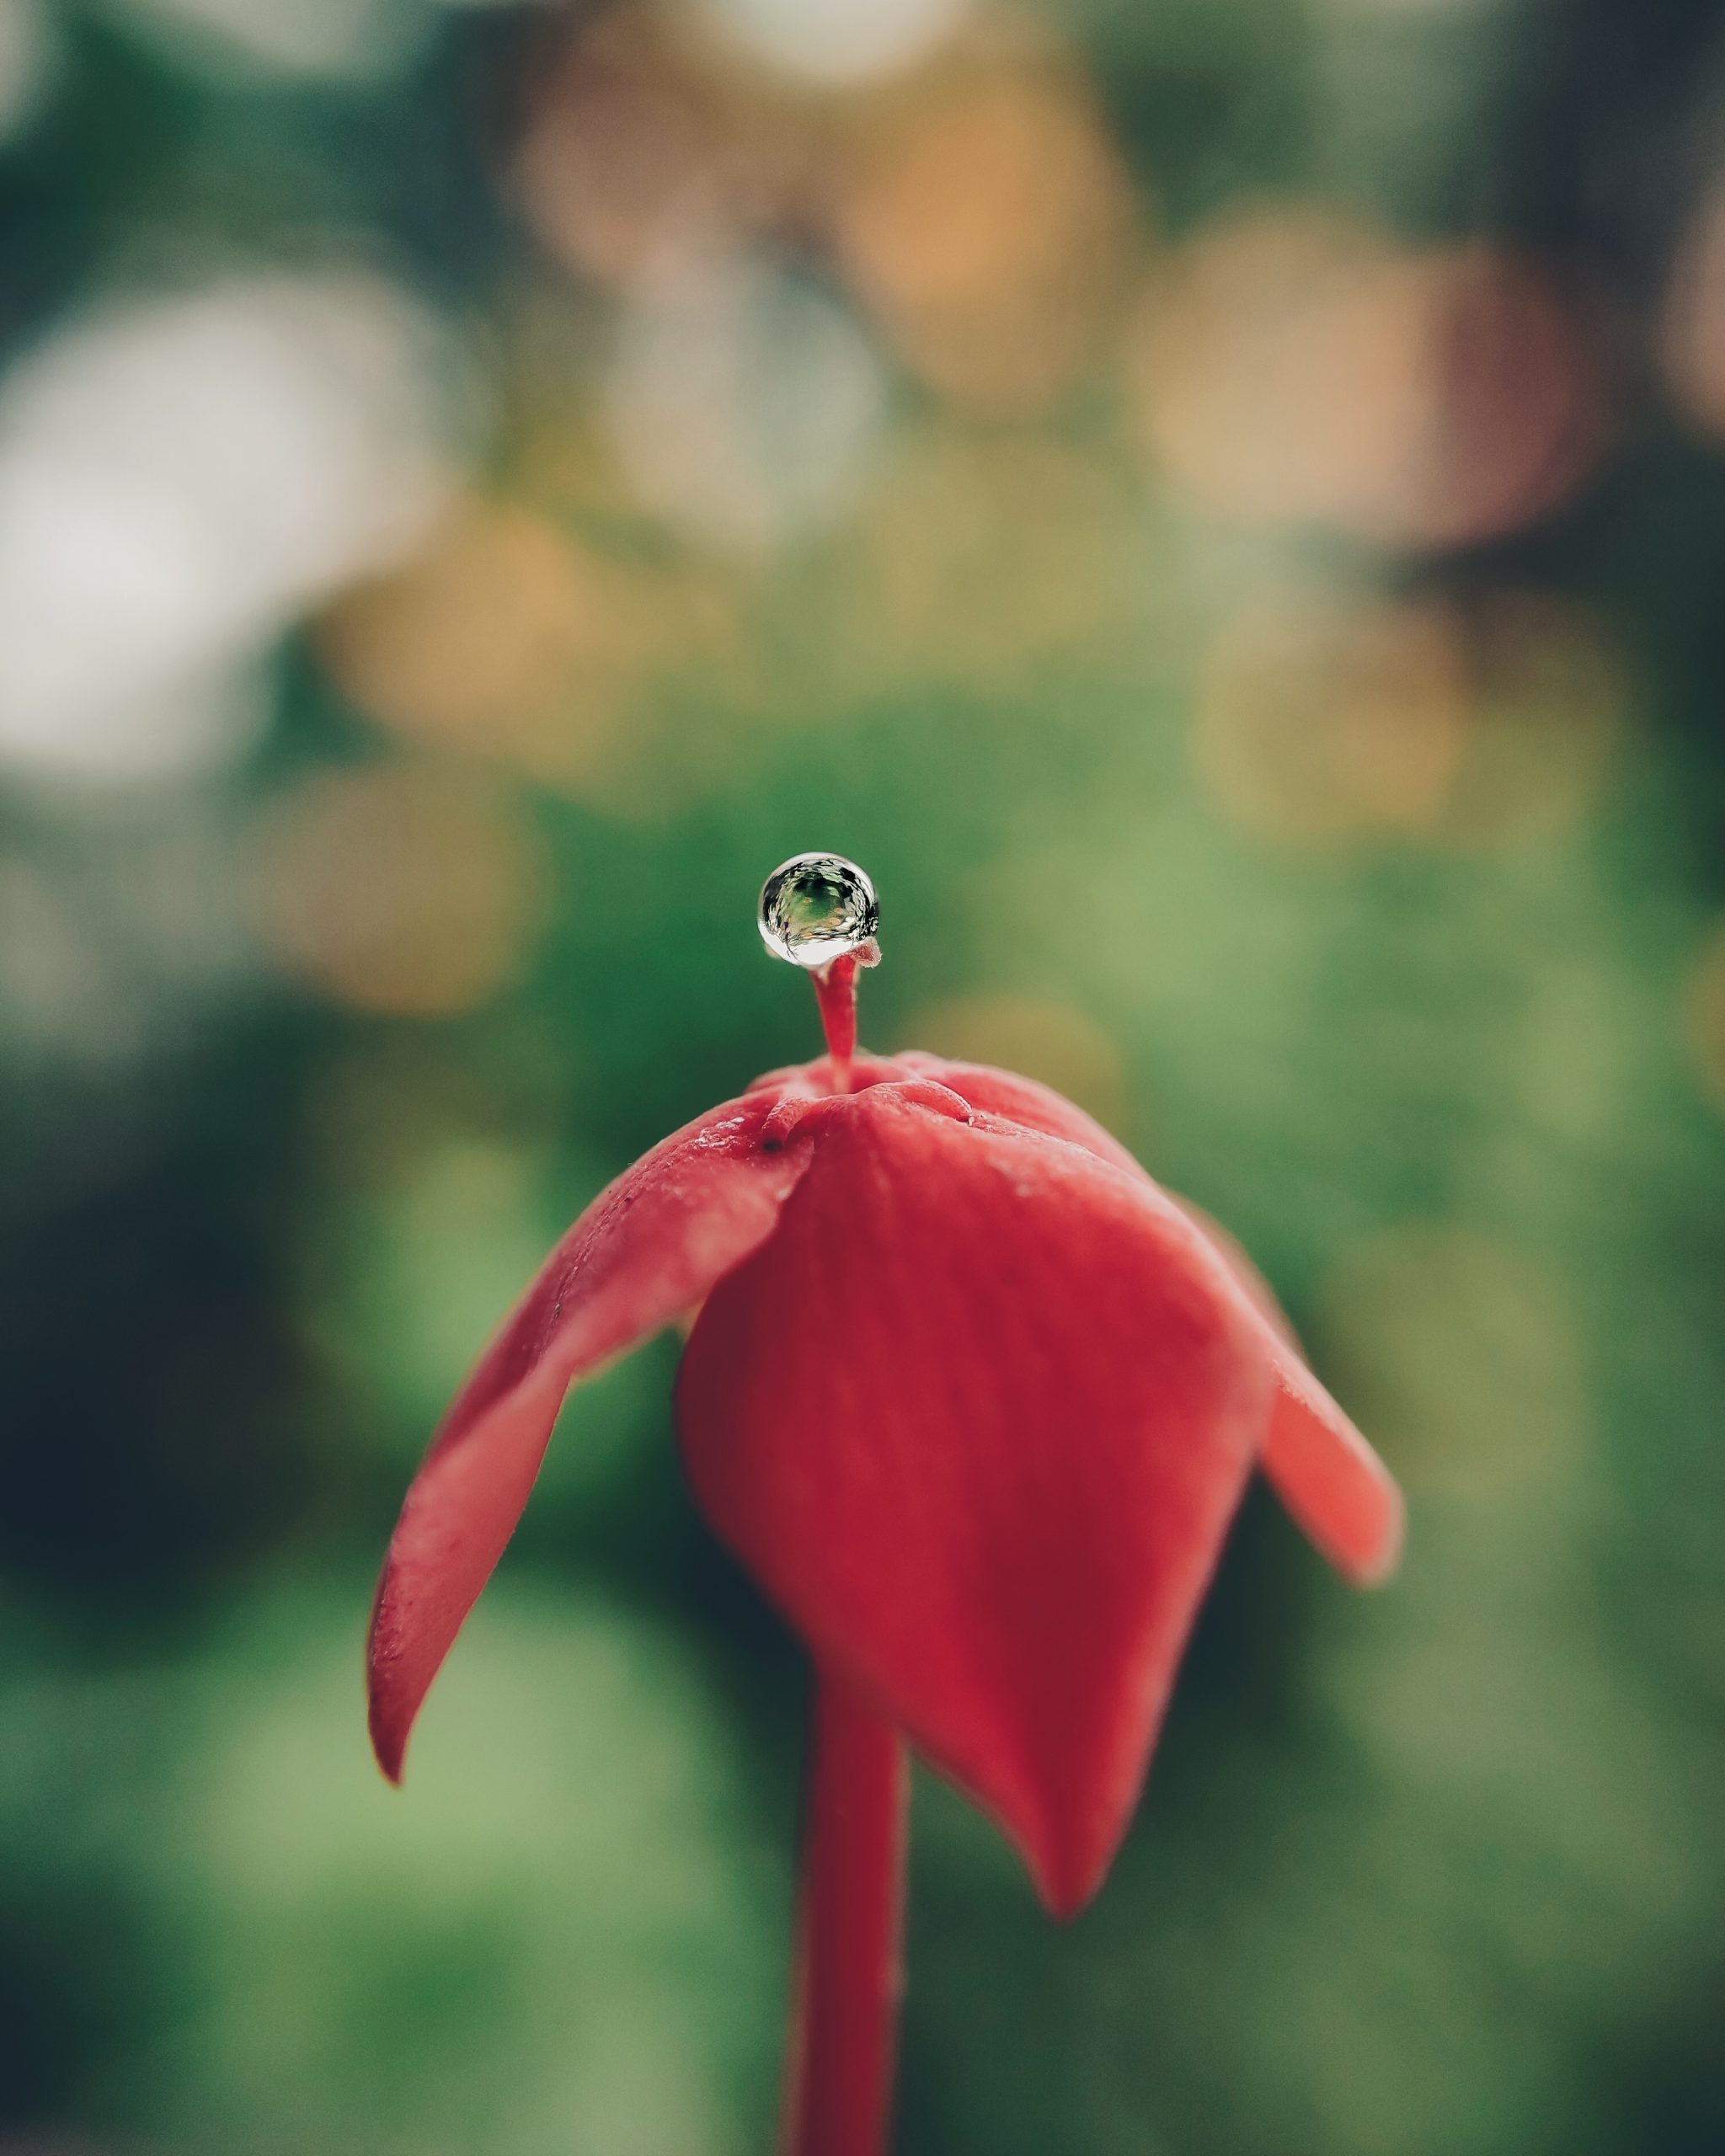 A water droplet on a flower